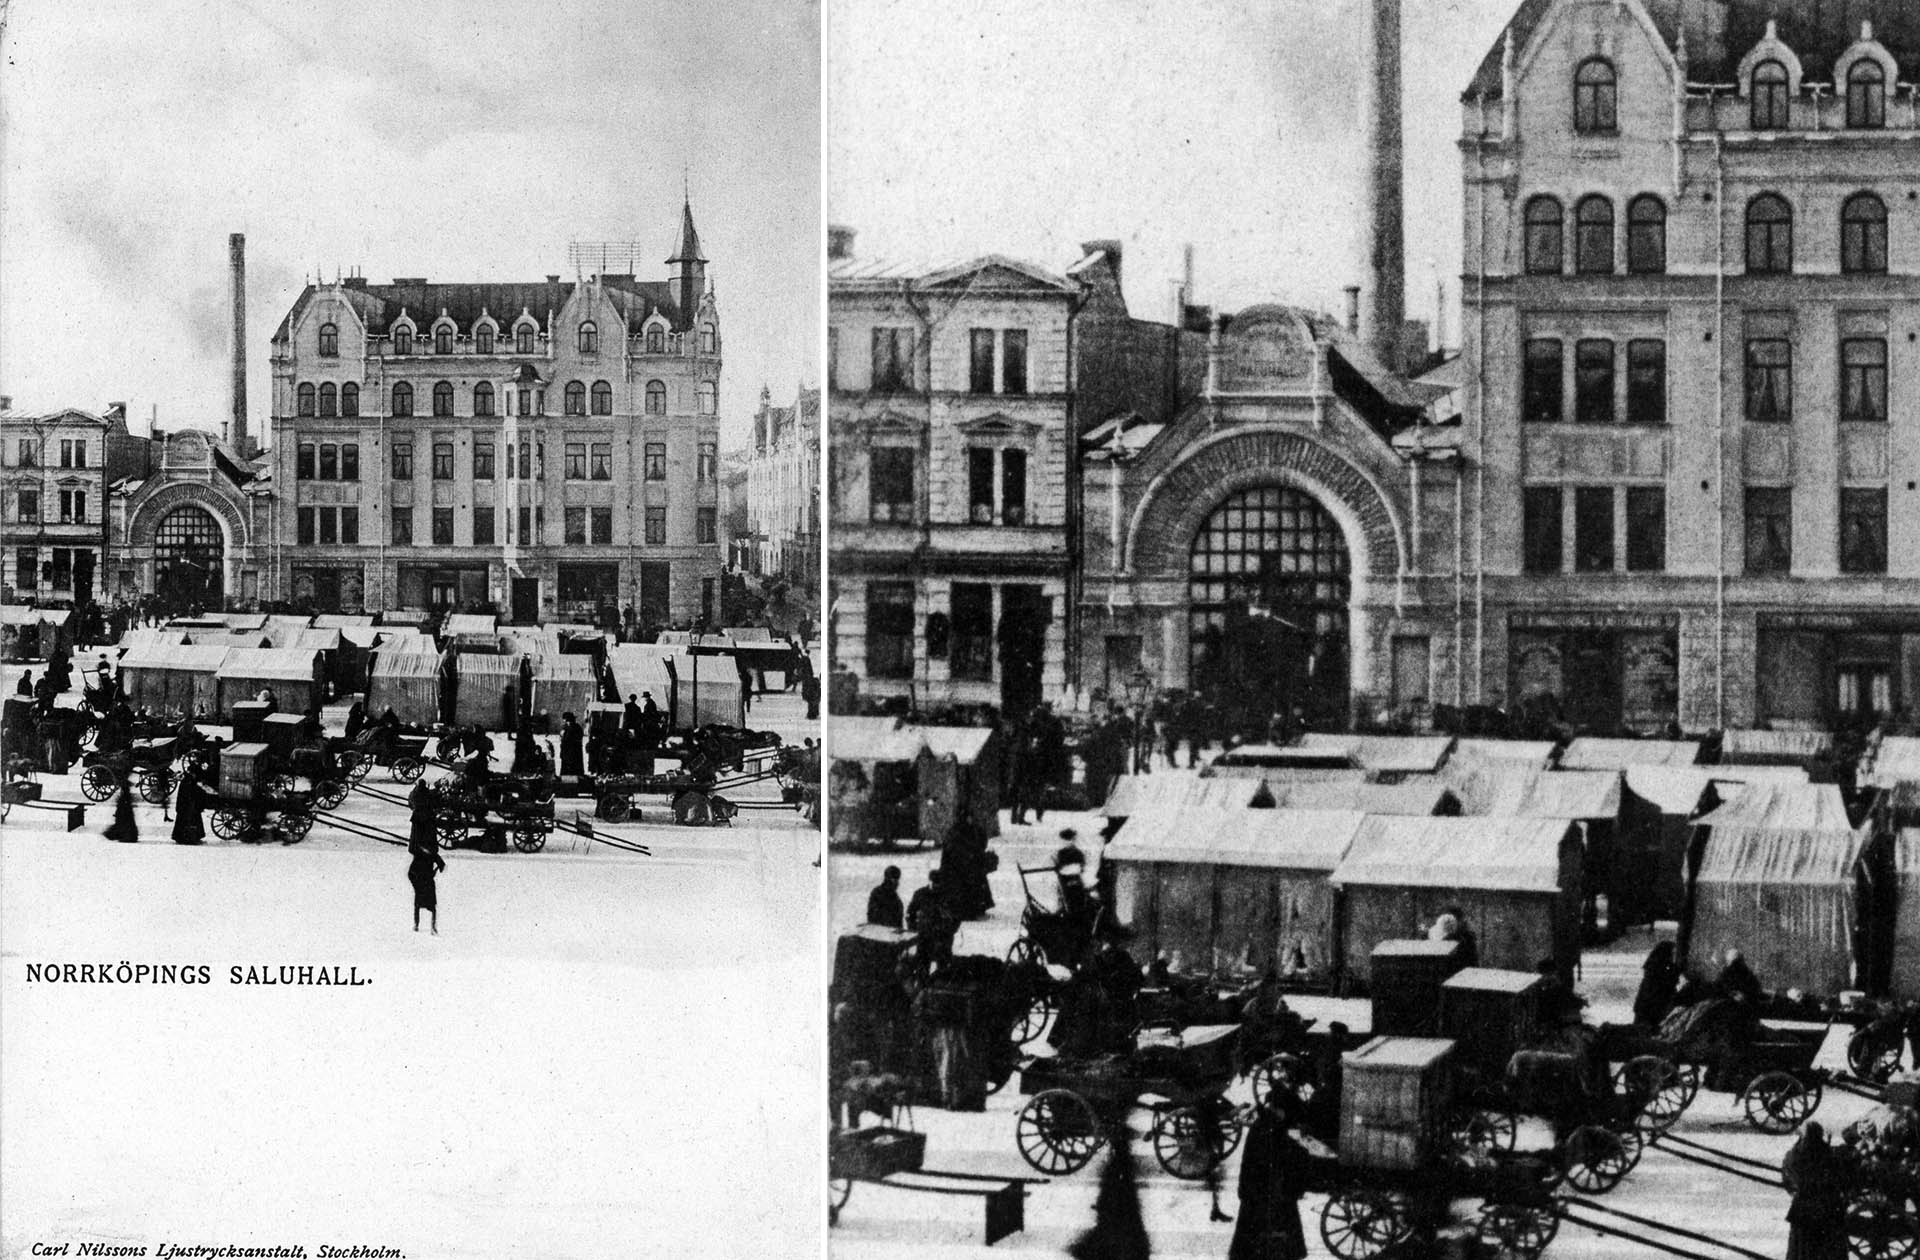 Picture from the nineteenth century with a view of Nya Torget and market trade